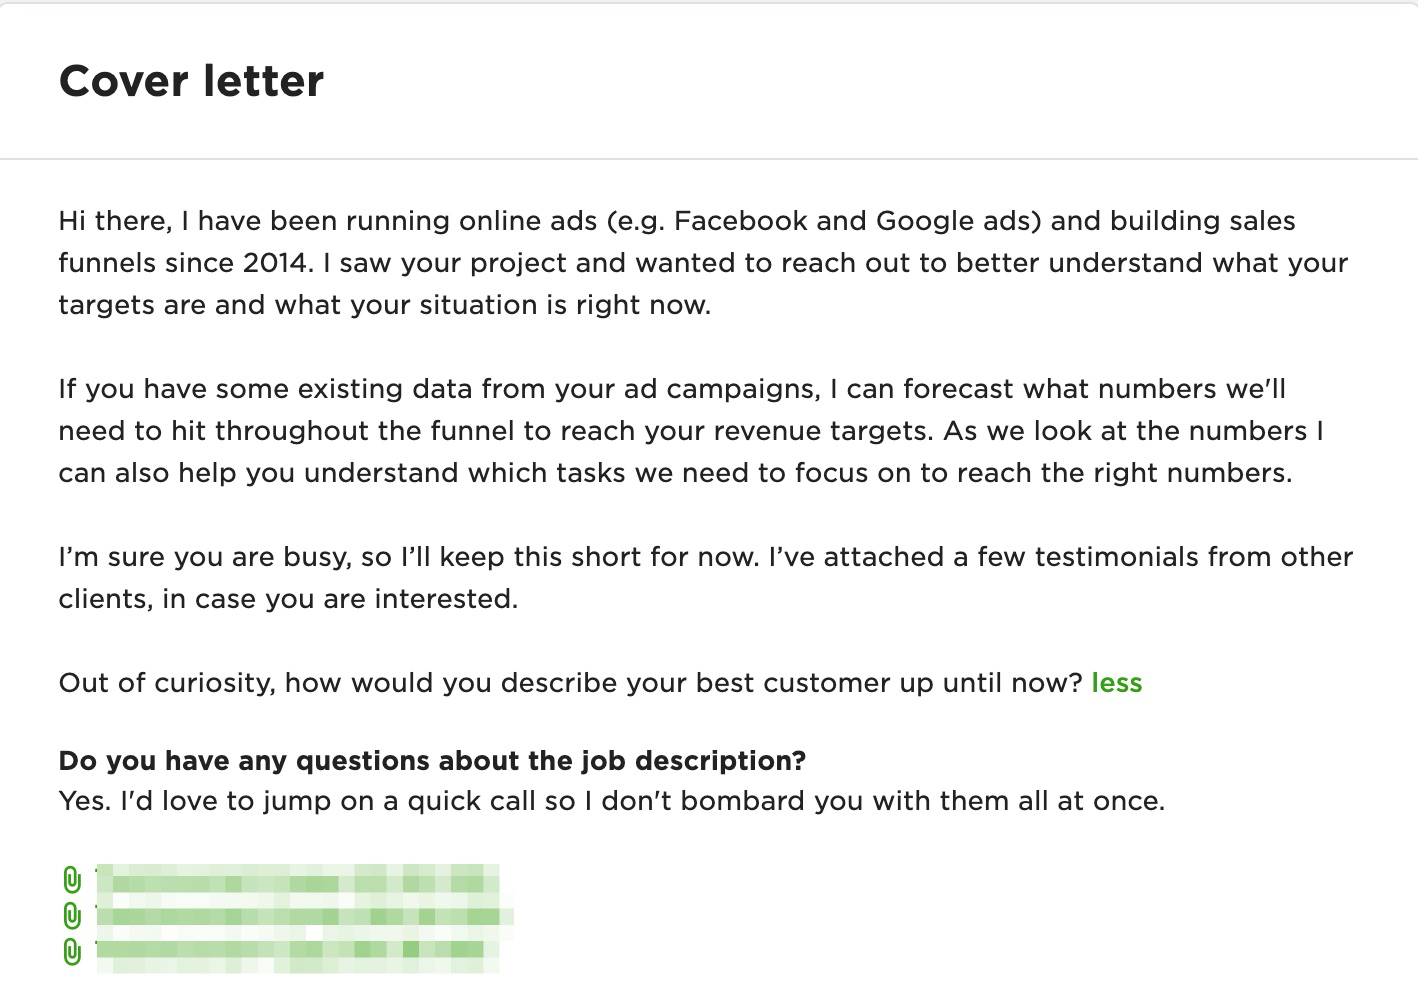 The best cover letter for Upwork (data-backed experiment)